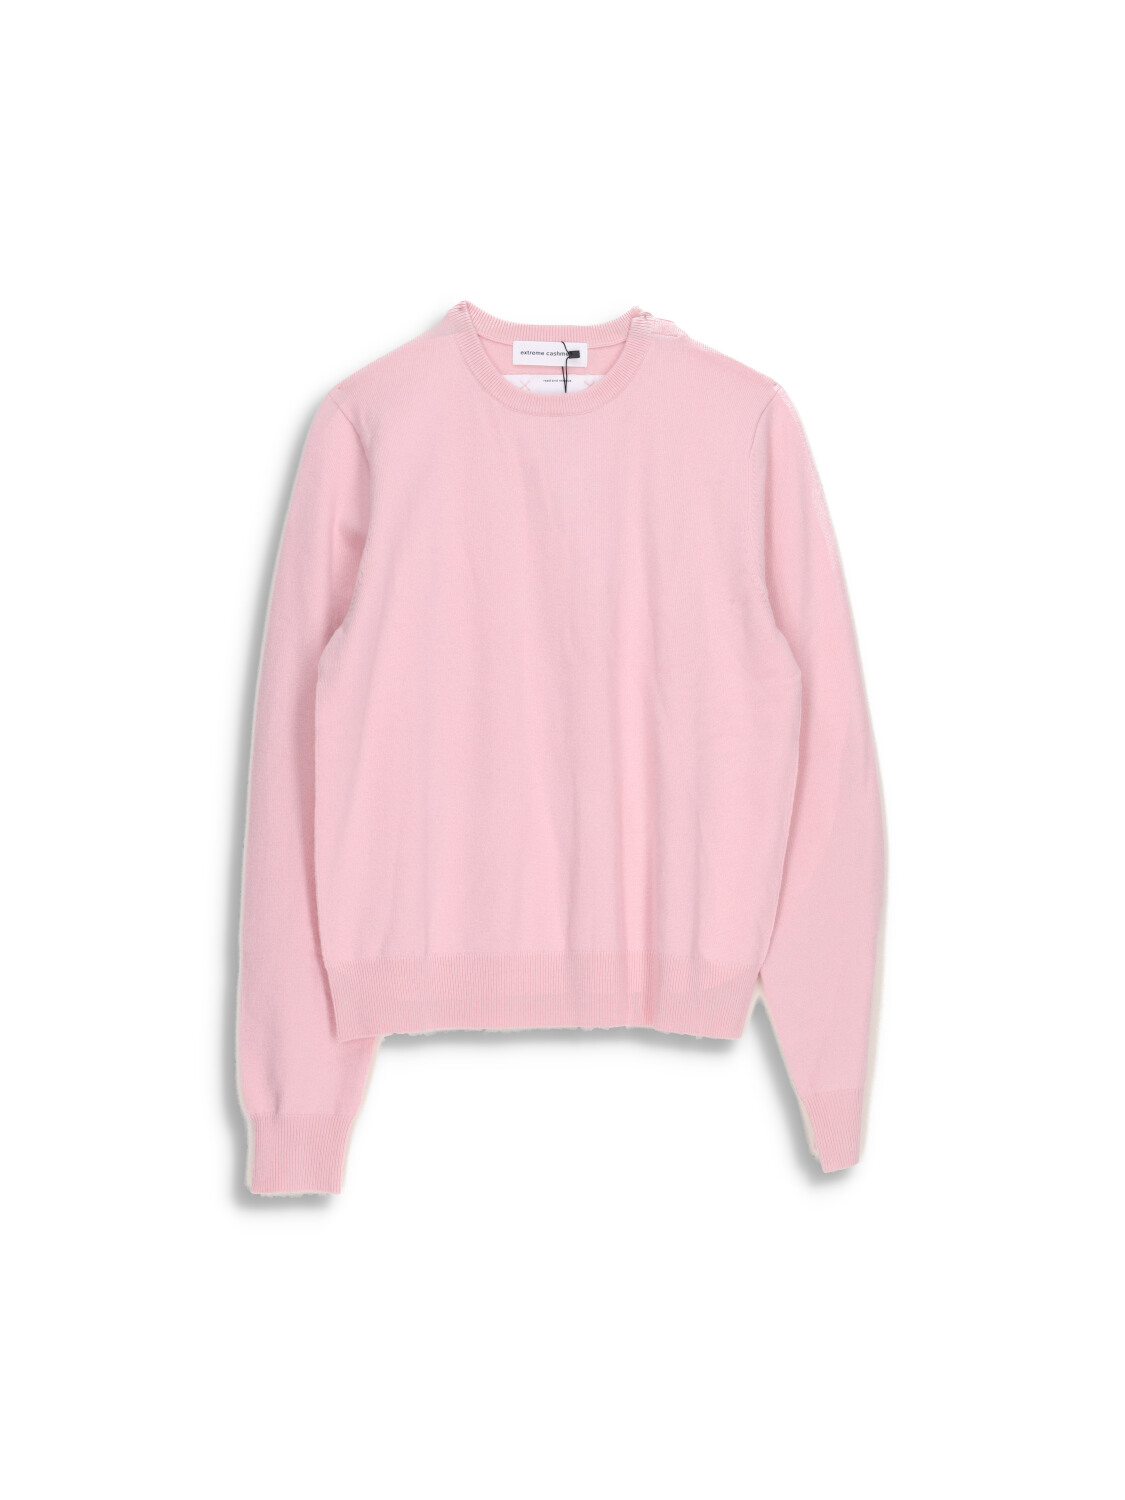 36 be classic - Sweater with collar